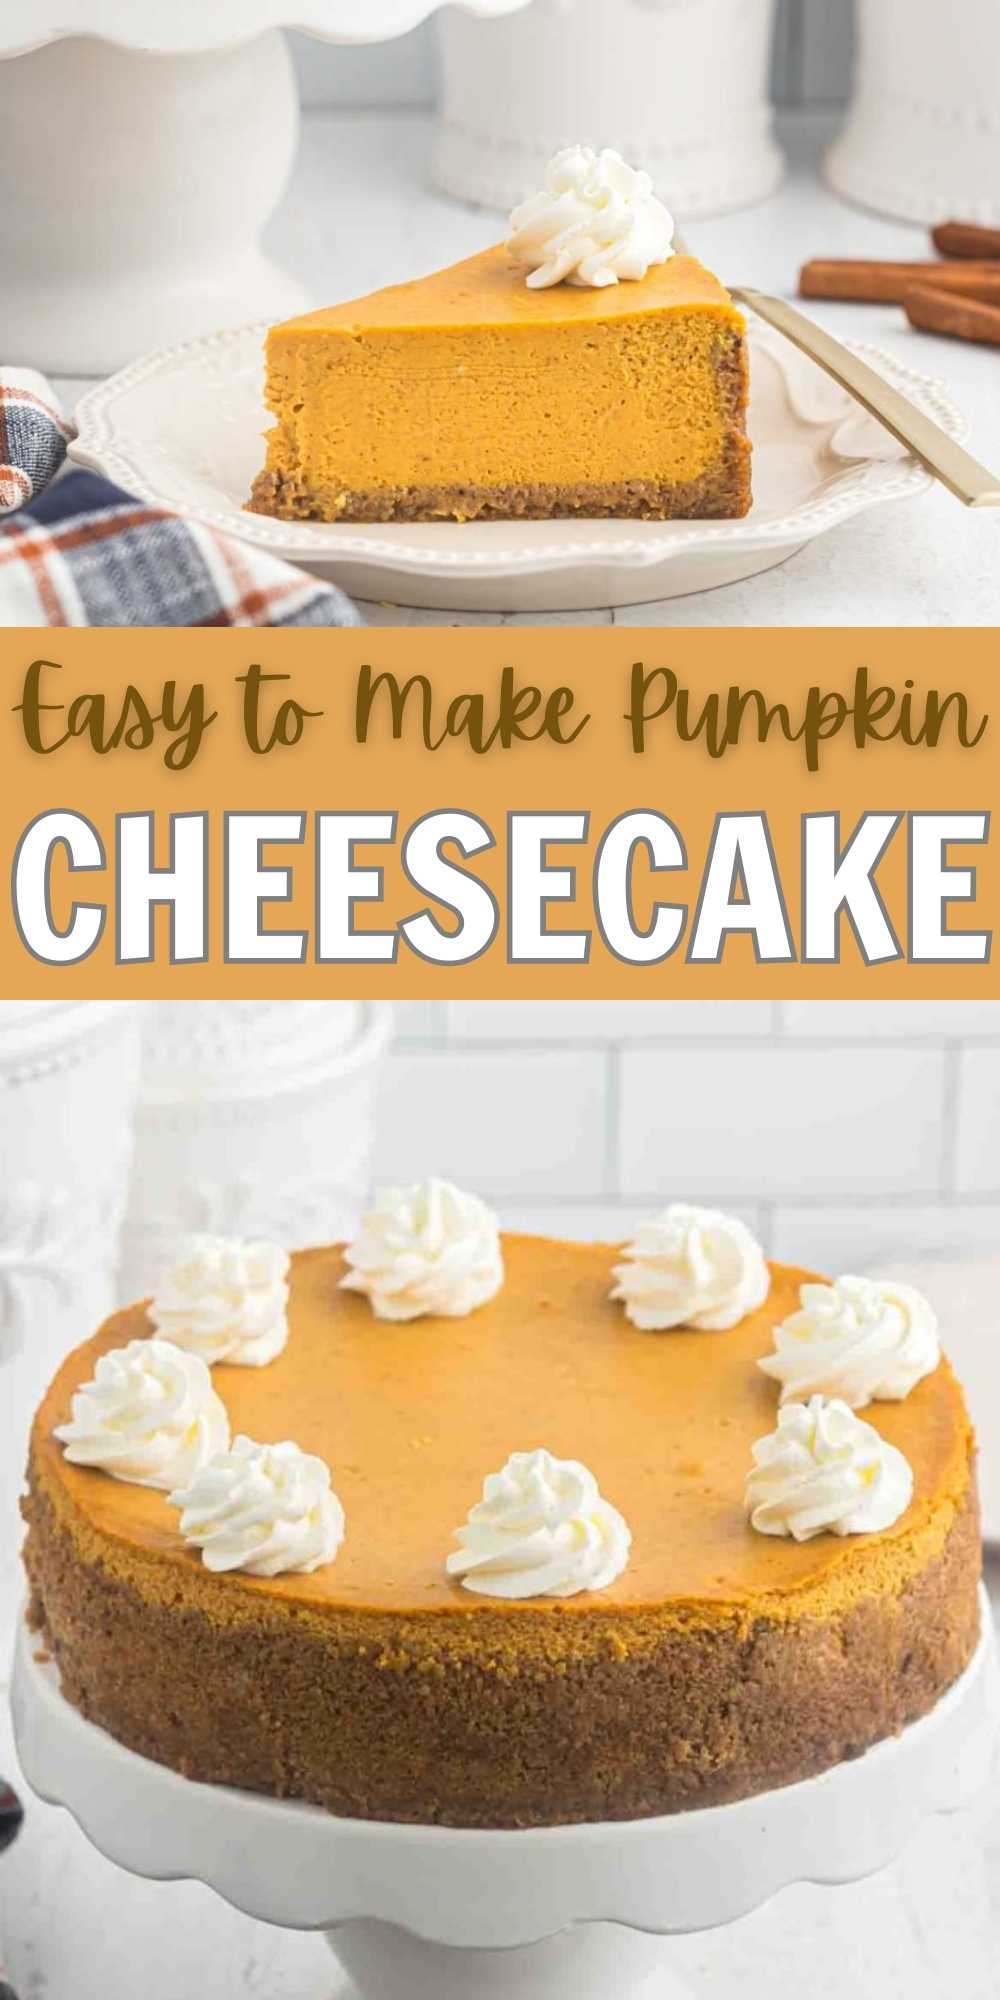 Take your classic cheesecake to the next level and make Pumpkin Cheesecake. This is the perfect dessert to start your fall baking with. We love a classic cheesecake but adding in a can of pumpkin makes it even better. If you love pumpkin desserts as much as my family, make this impressive cheesecake recipe. #eatingonadime #pumpkincheesecake #cheesecake